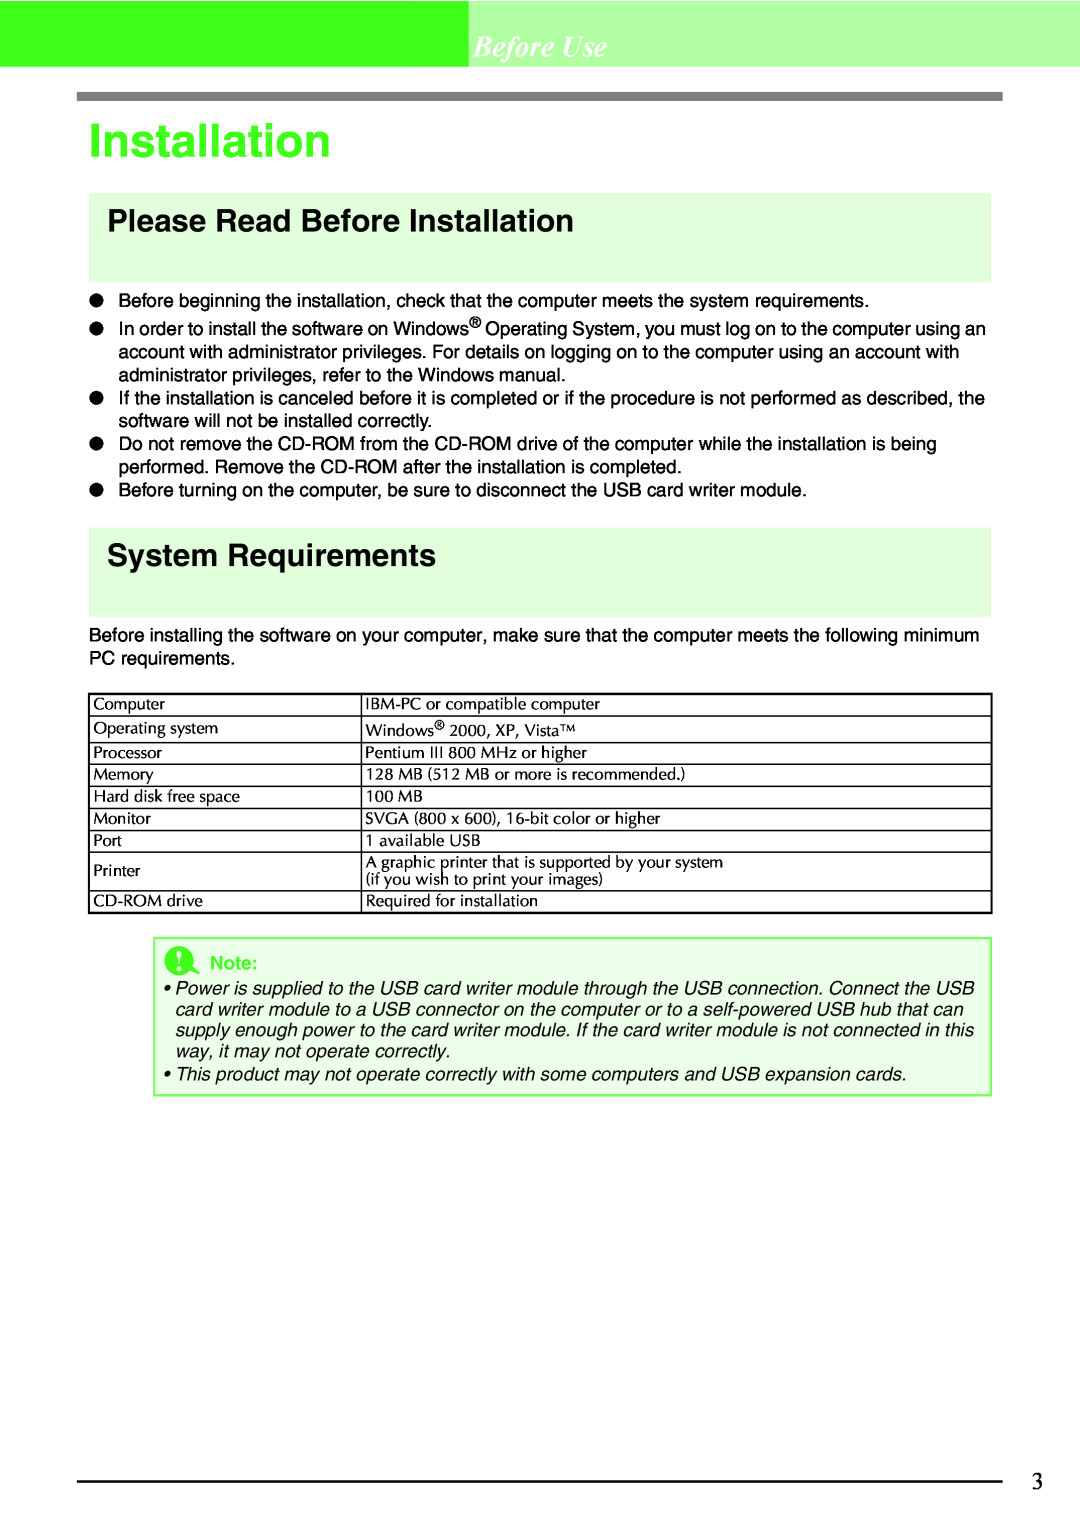 Brother Brother USB Writer, PE-DESIGN manual Please Read Before Installation, System Requirements, Before Use, a Note 